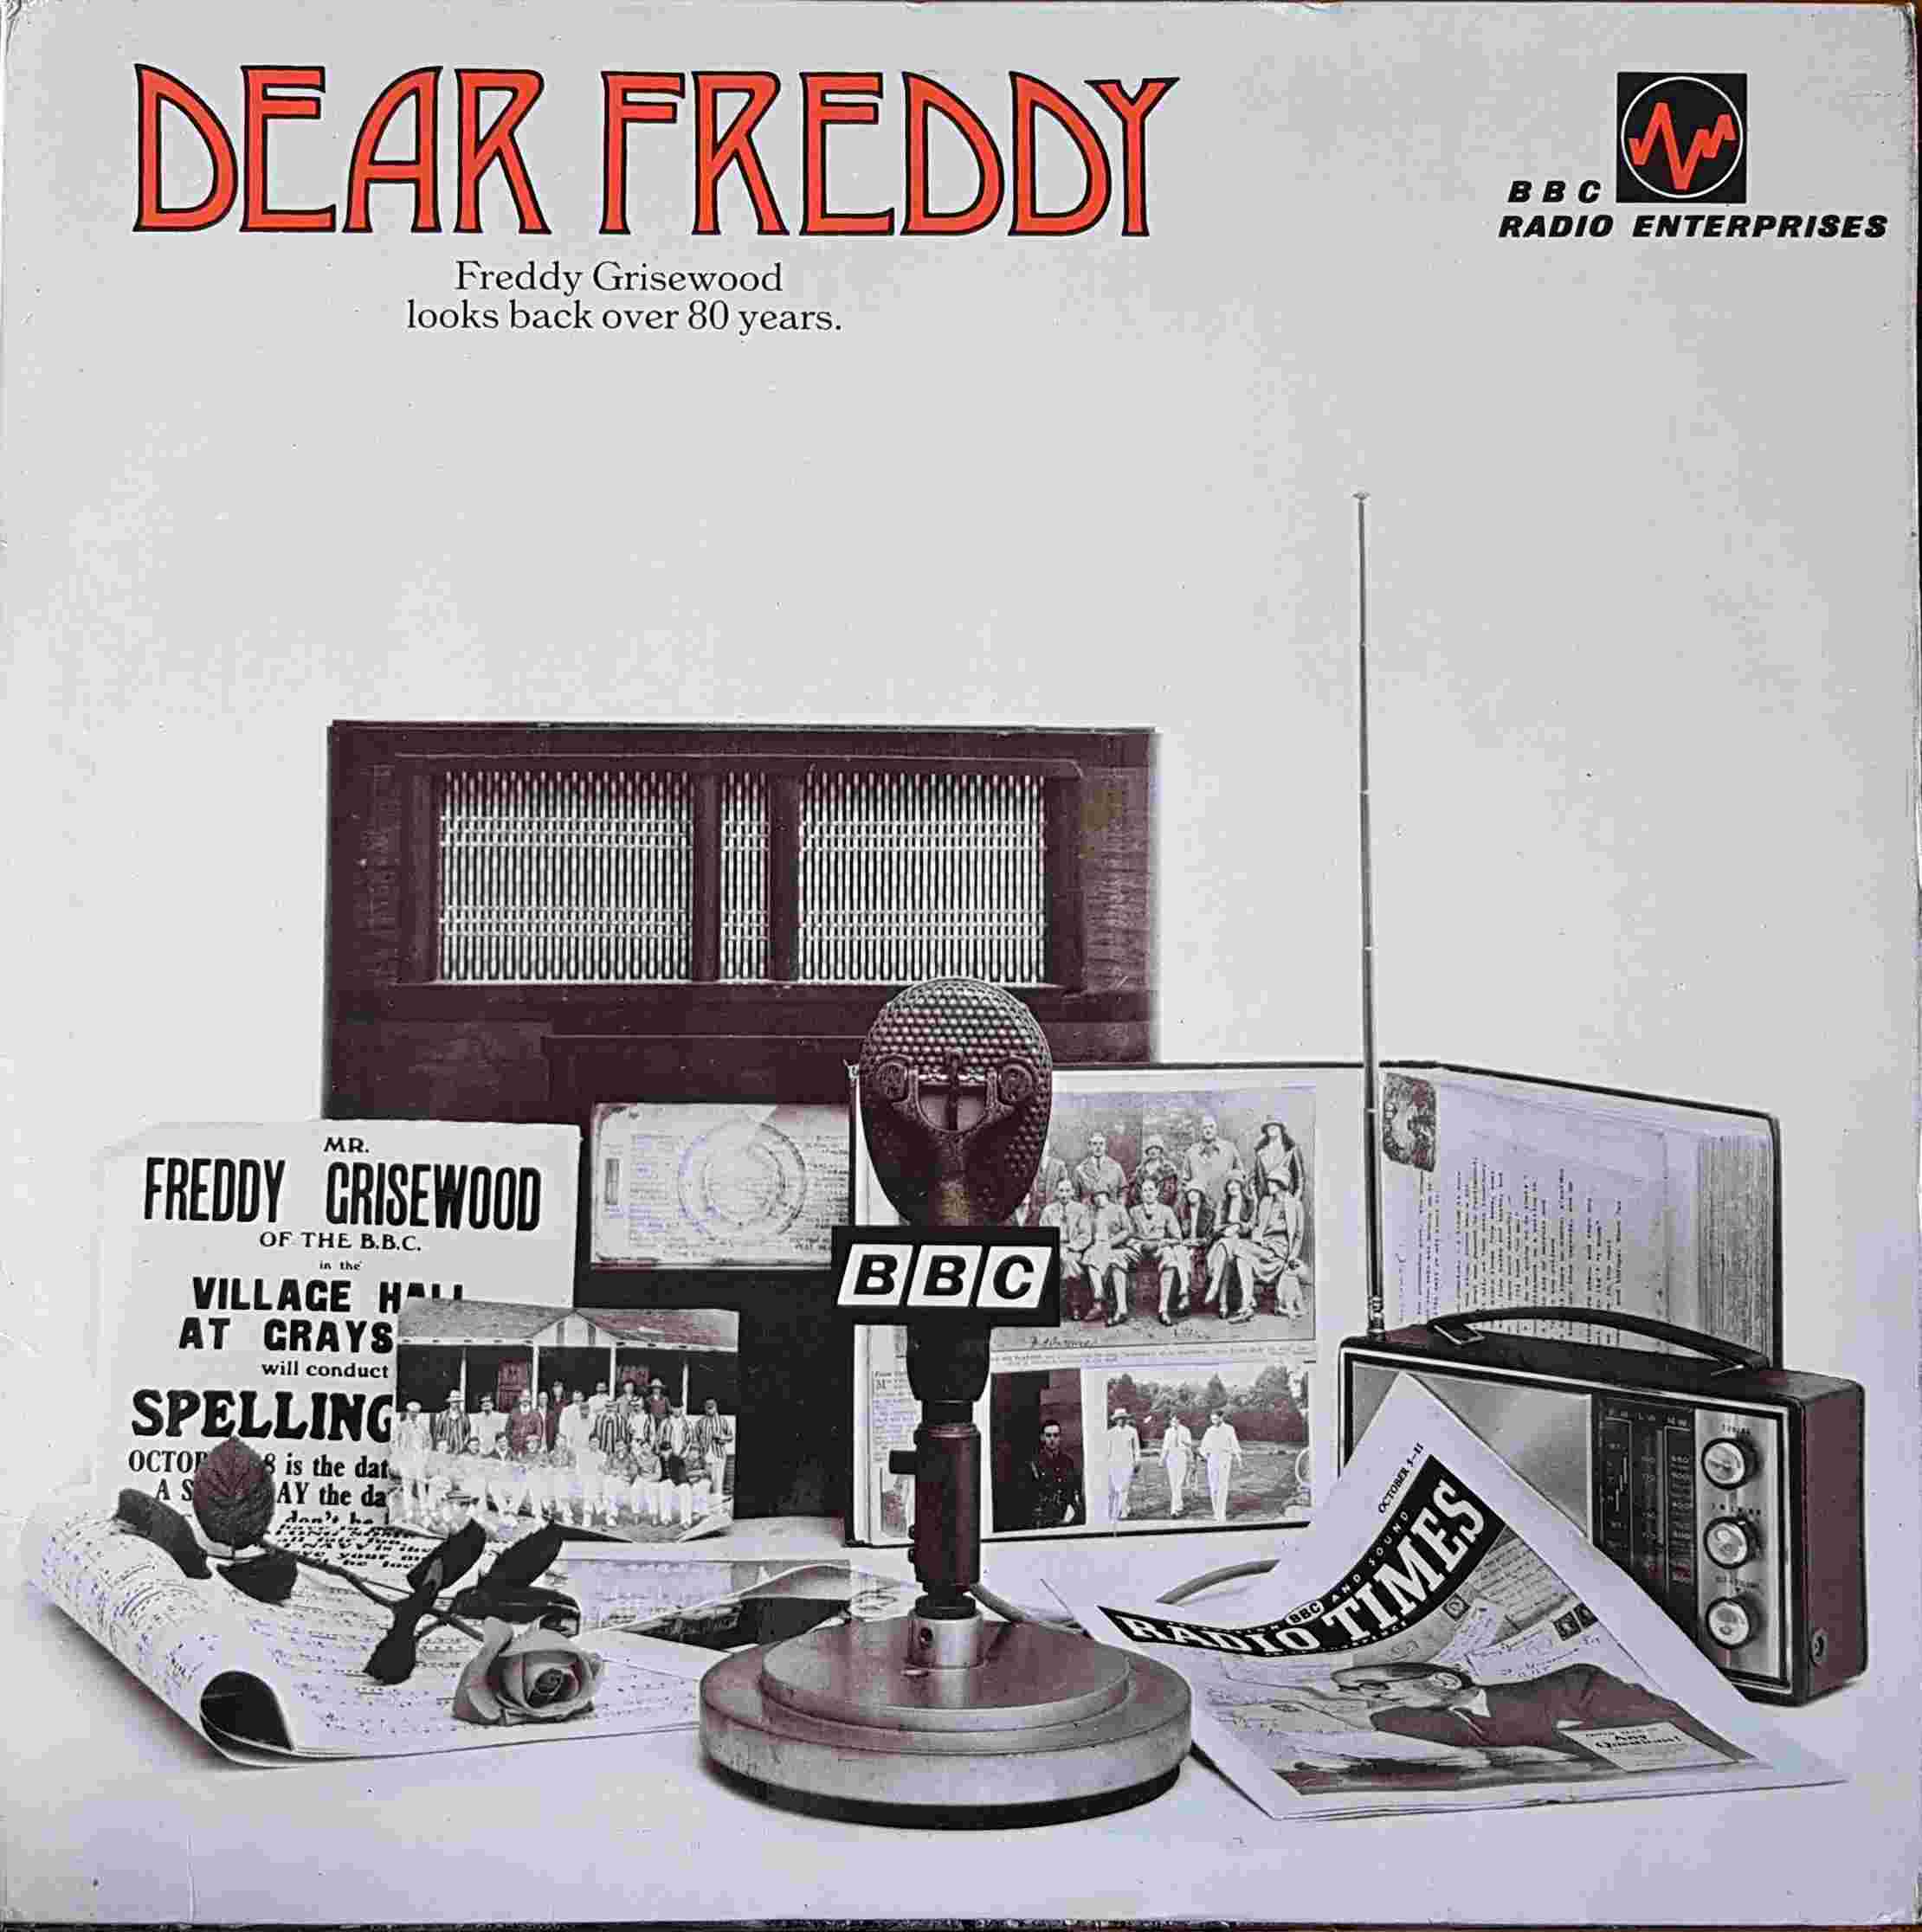 Picture of REB 20 Dear Freddy by artist Freddy Grisewood from the BBC albums - Records and Tapes library